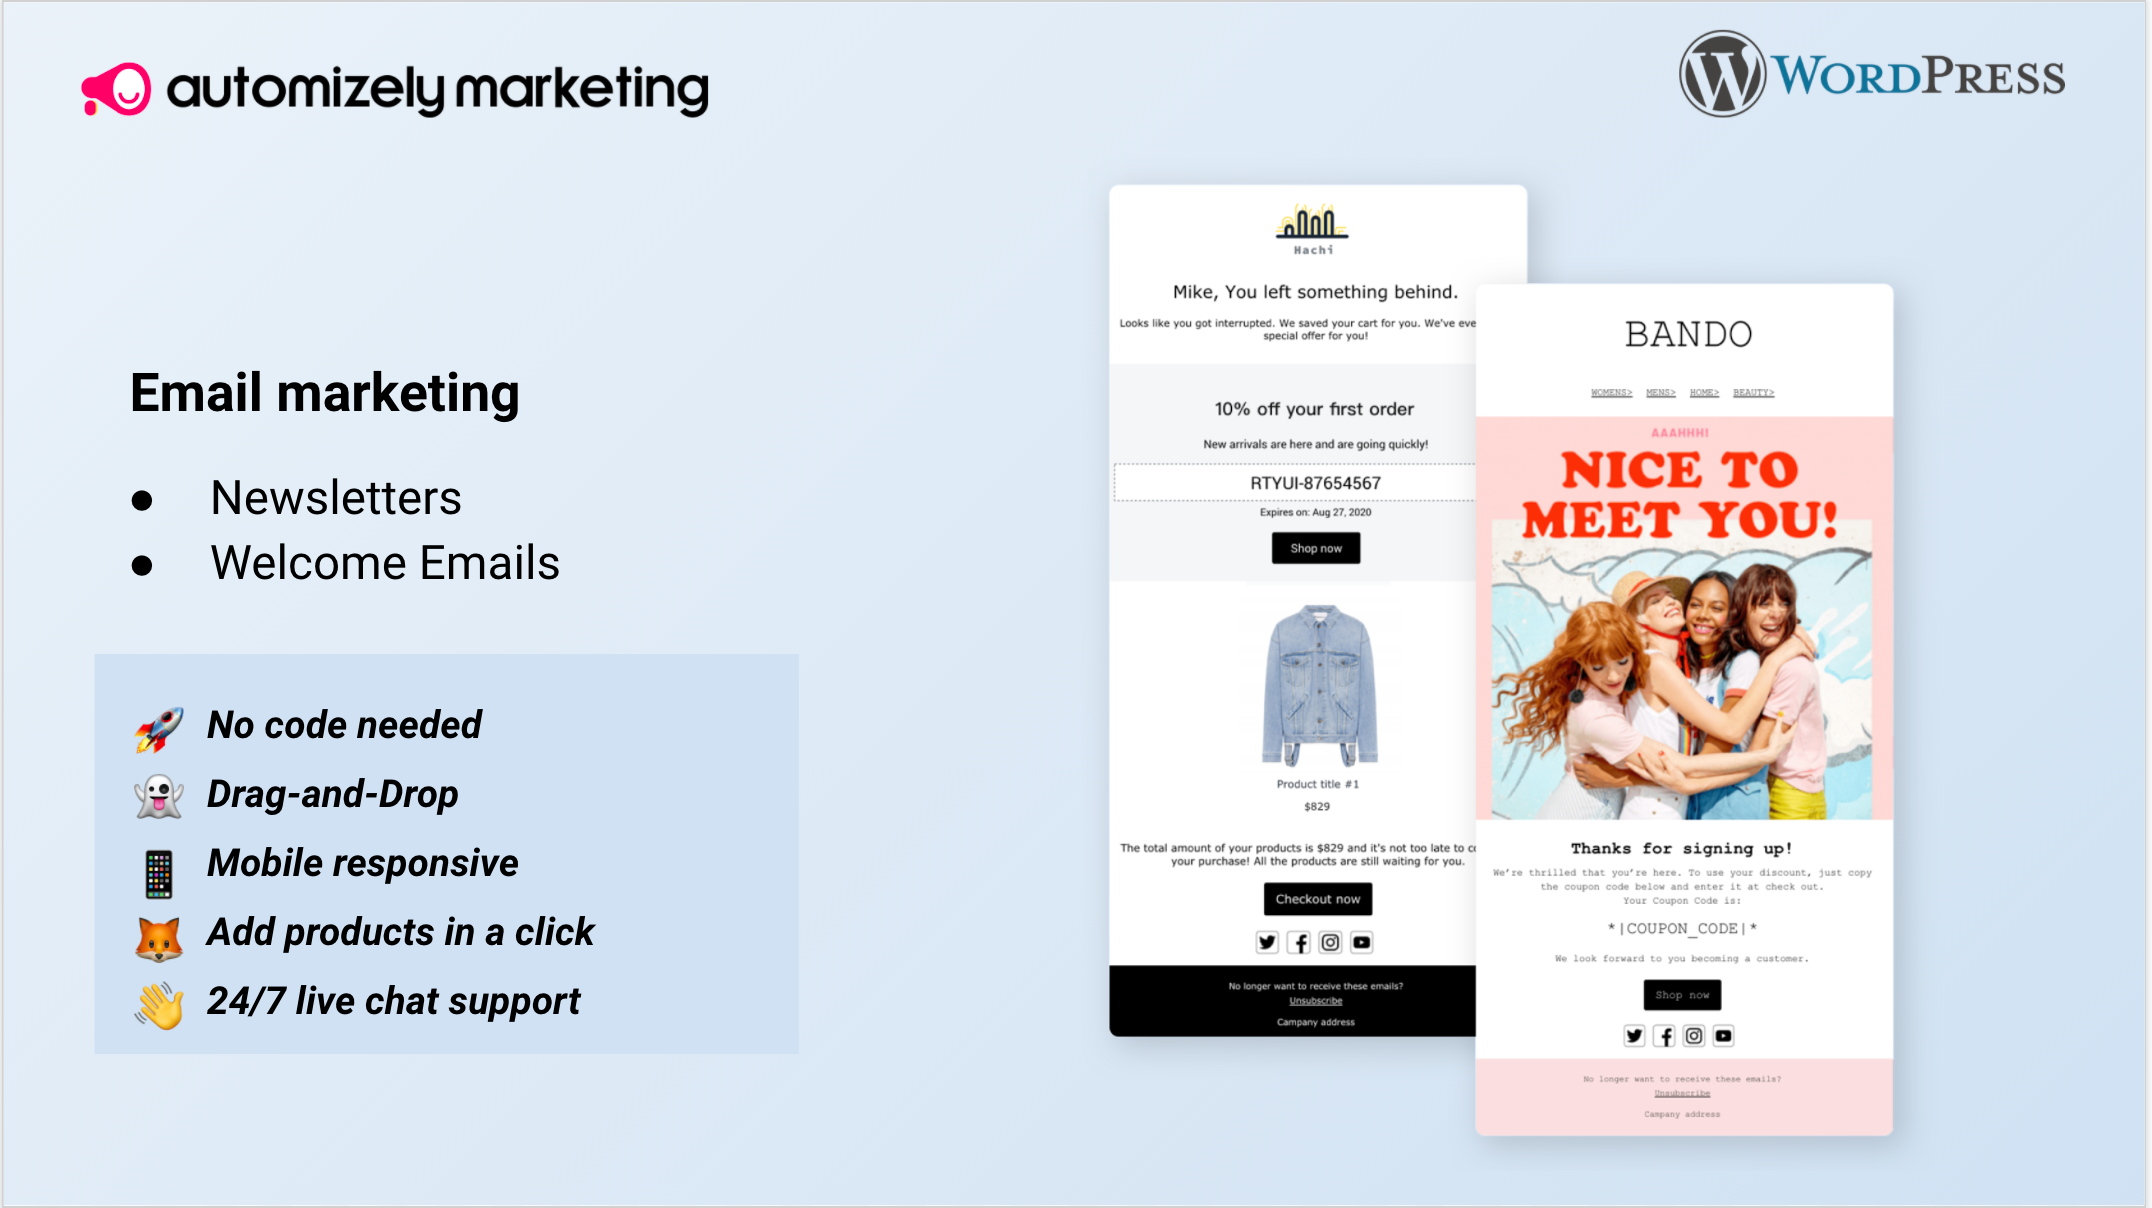 Start a conversation with your customers with the easy-to-use email popup marketing features.